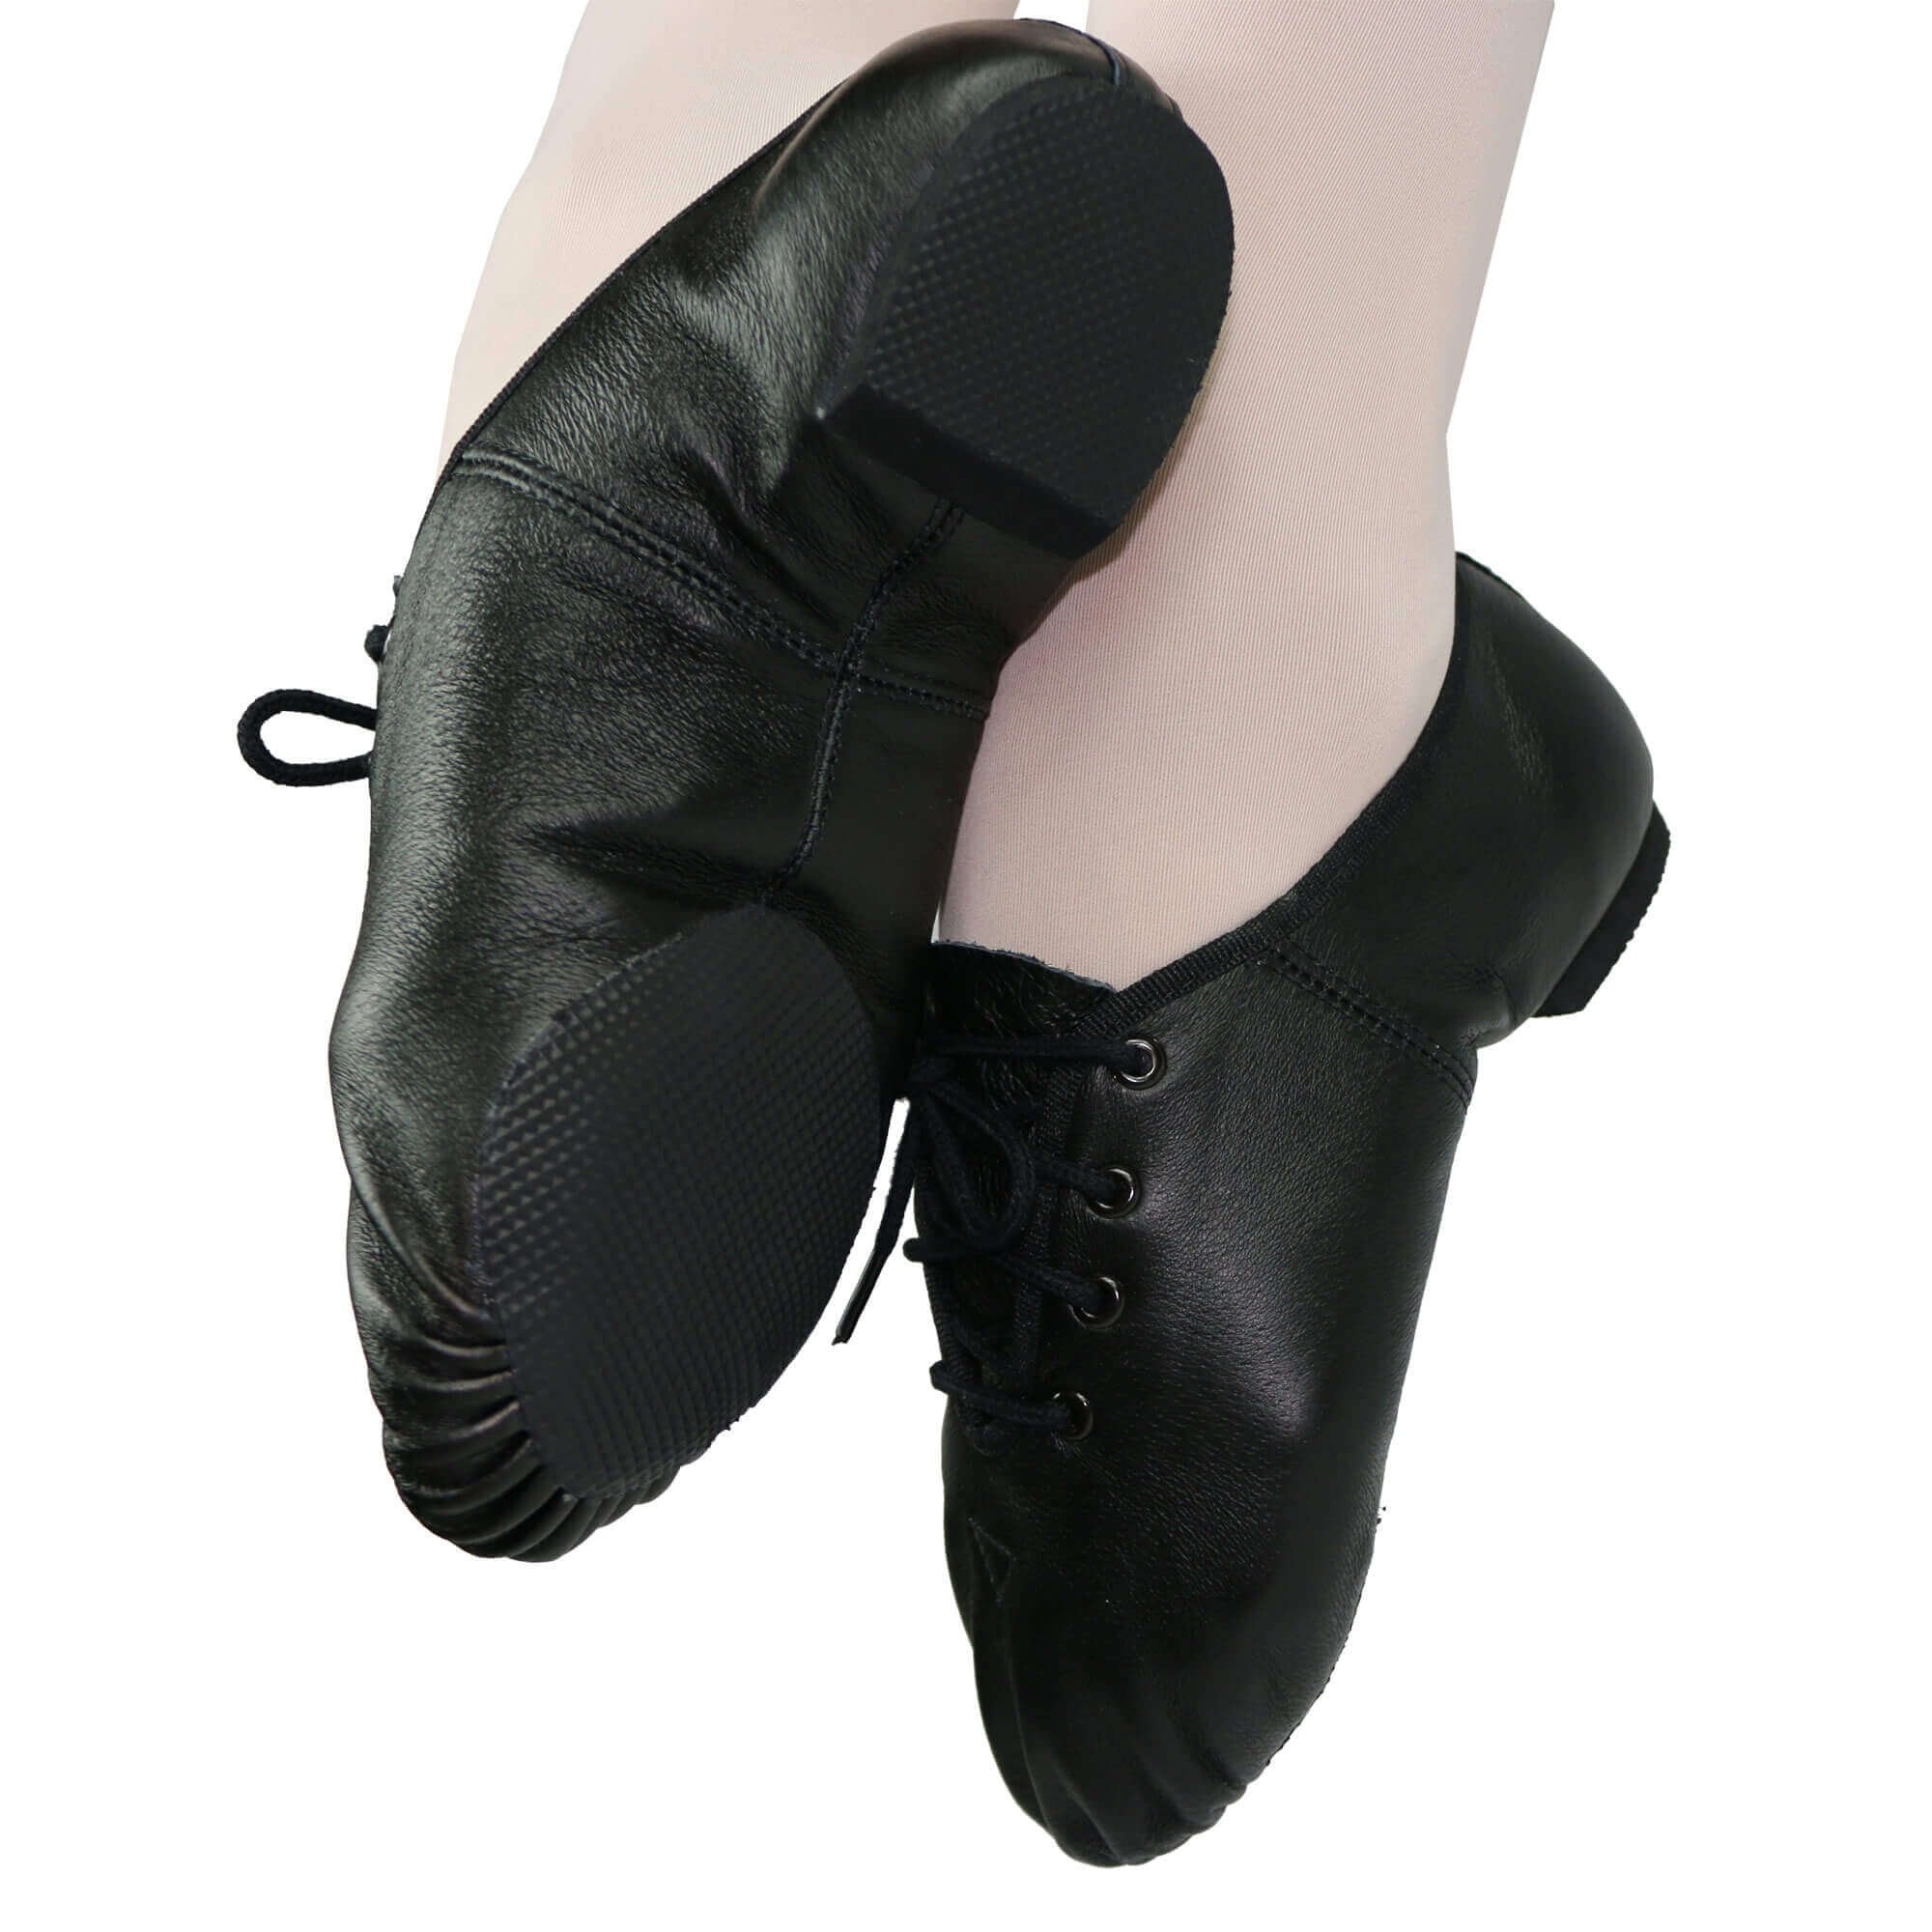 Danzcue Youth "Jazzsoft" Jazz Shoes - Click Image to Close